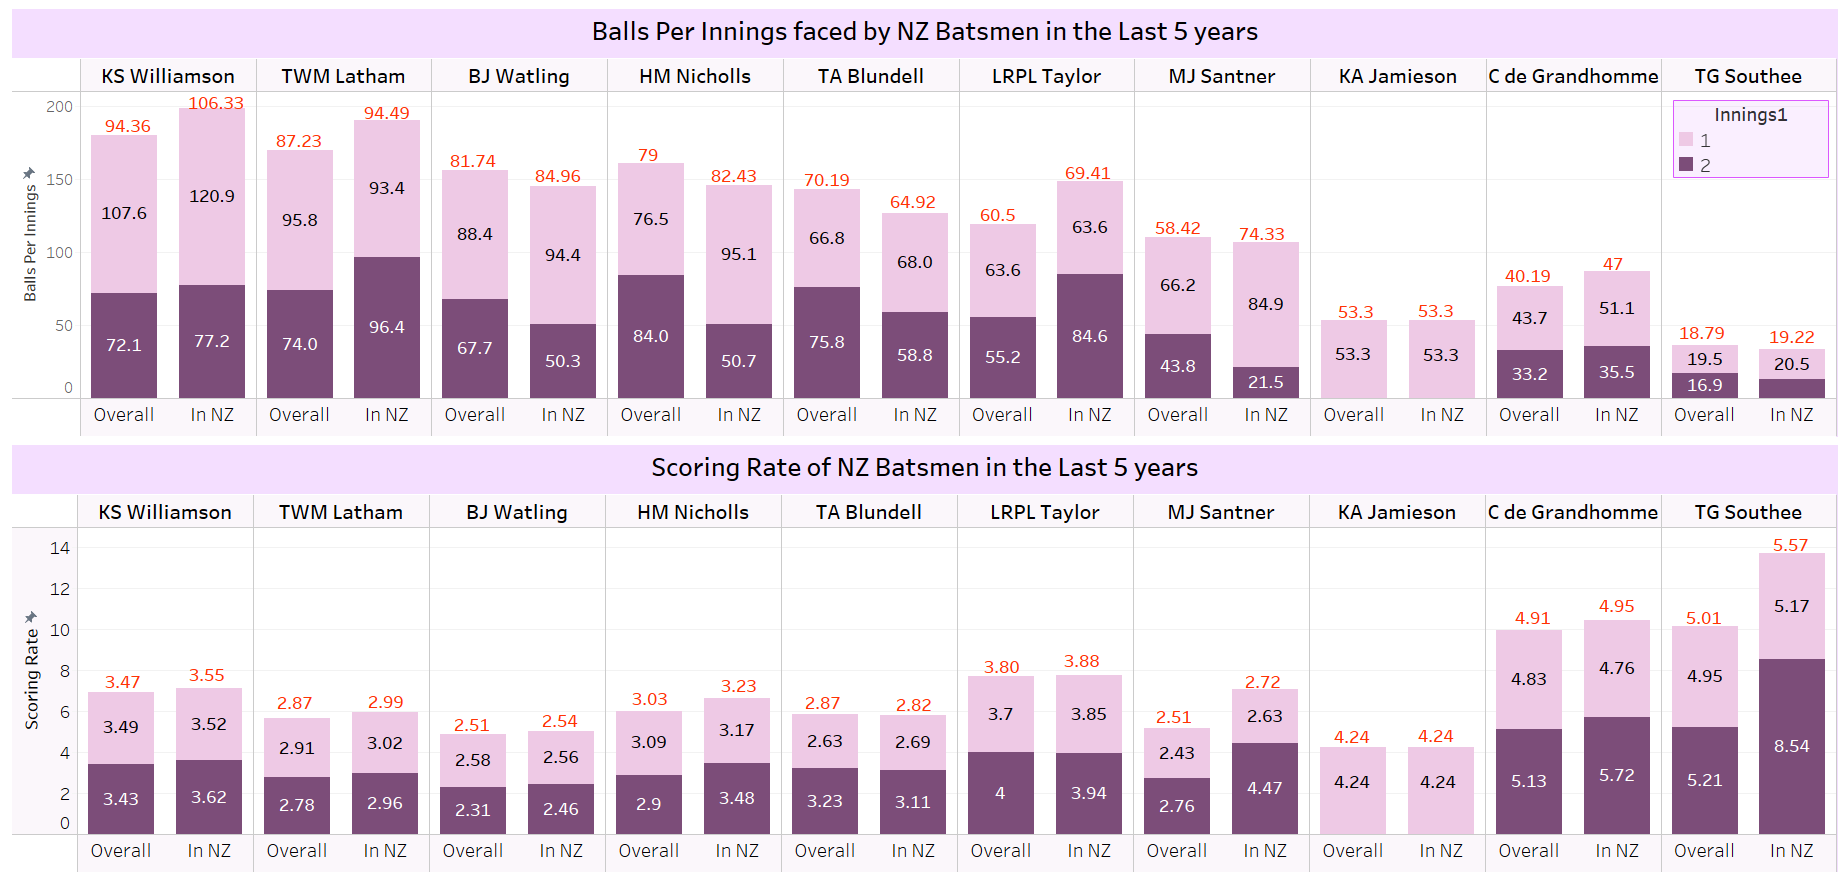 Balls Per Innings and Scoring rates of NZ Batsmen in the last 5 years, Weighted Batting Averages coming next.